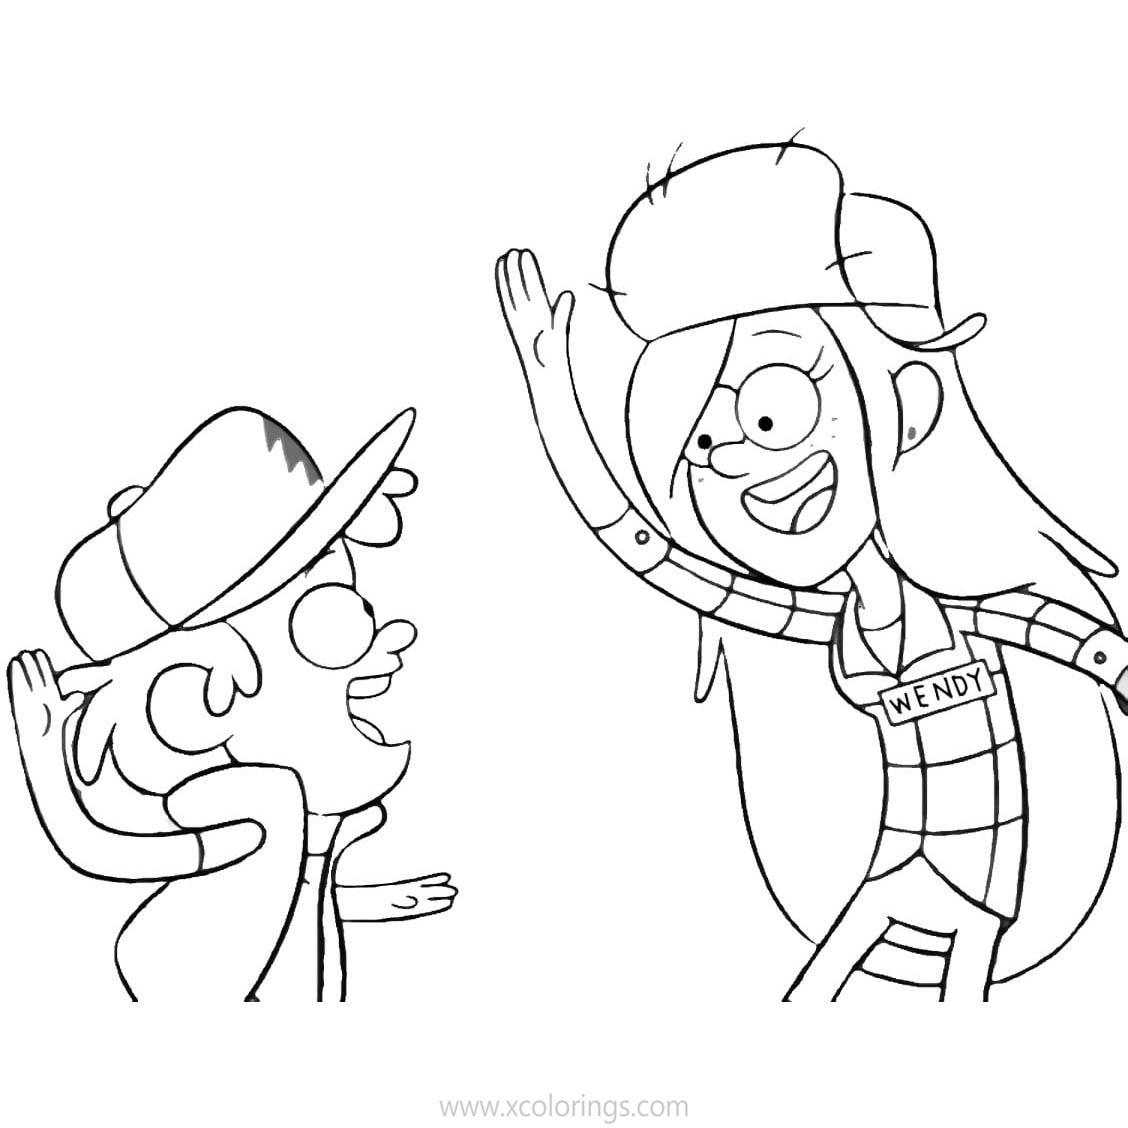 Free How to Draw Gravity Falls Wendy and Dipper Coloring Pages printable